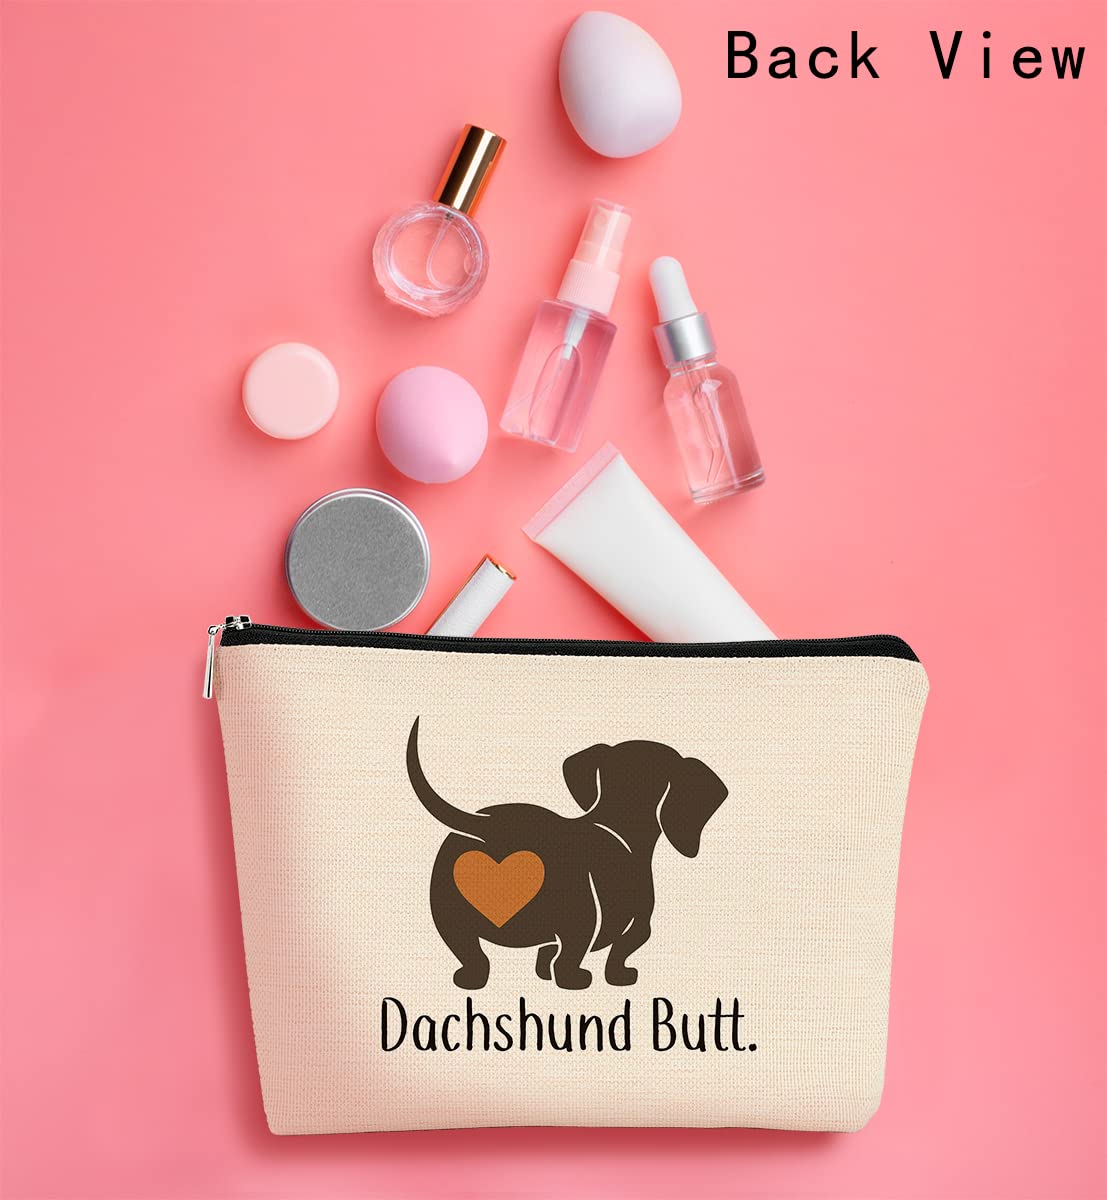 BARPERY Funny Dachshund Makeup Bag,Guess What It's Pug Butt Cartoon Cute Sausage Dog Puppy Cosmetic Bag Best Gift Idea for Dog Loves,Birthday for Dachshund Mom Girls Women， Teen Girls Daughter